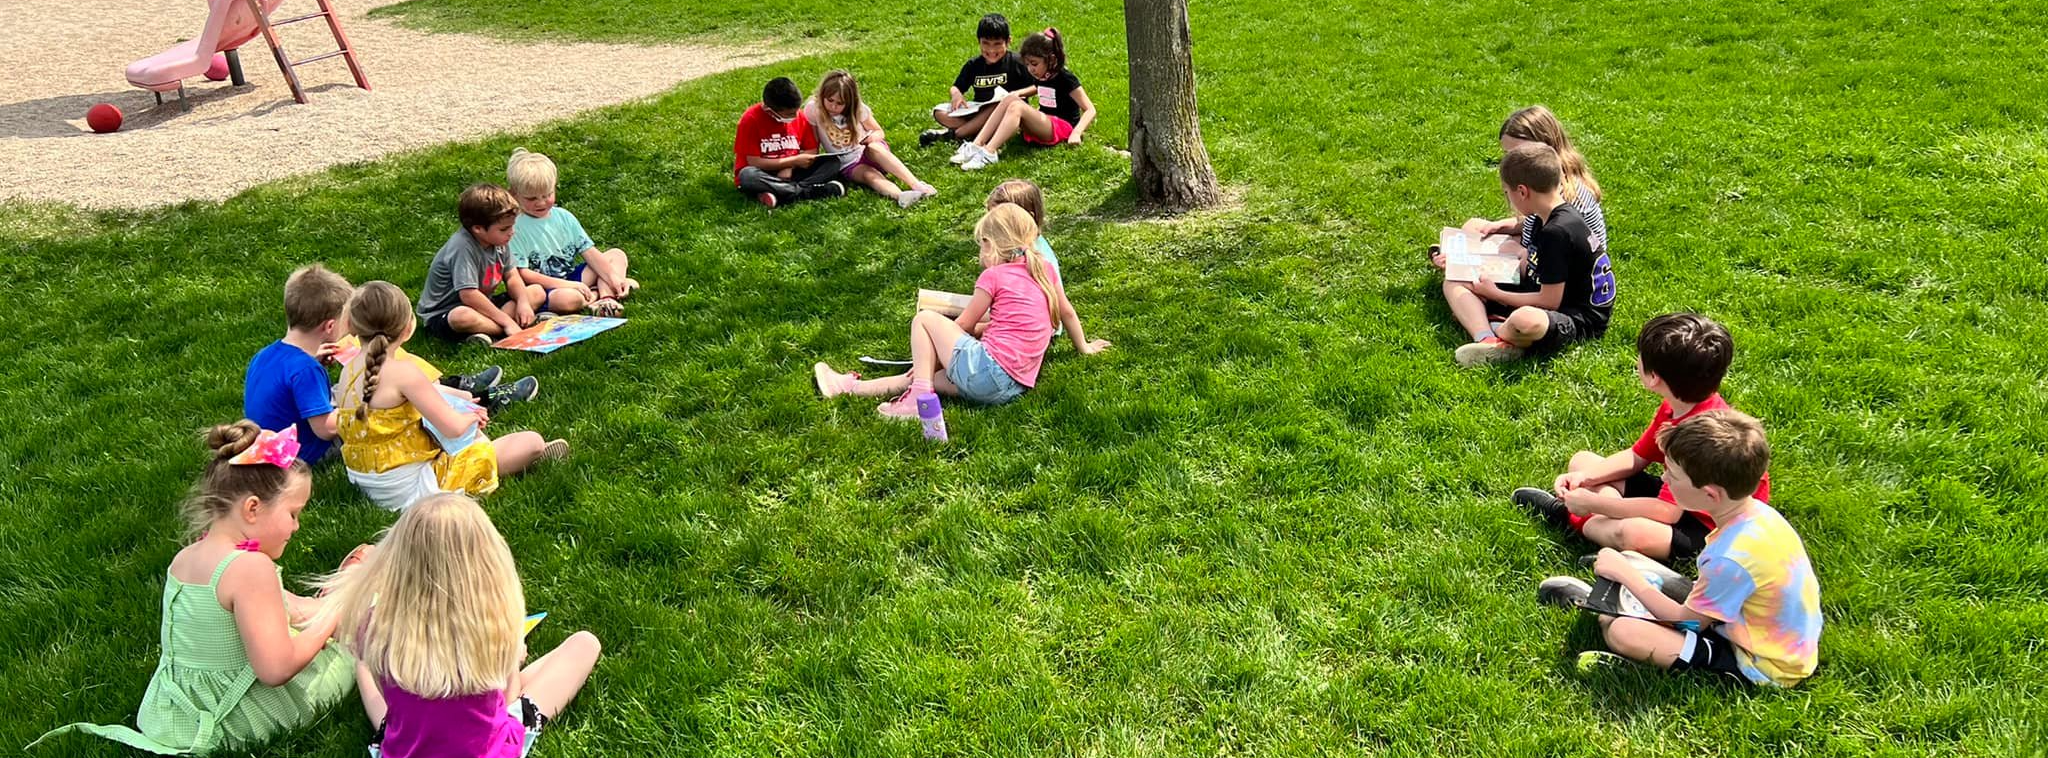 Students sitting on the grass, reading